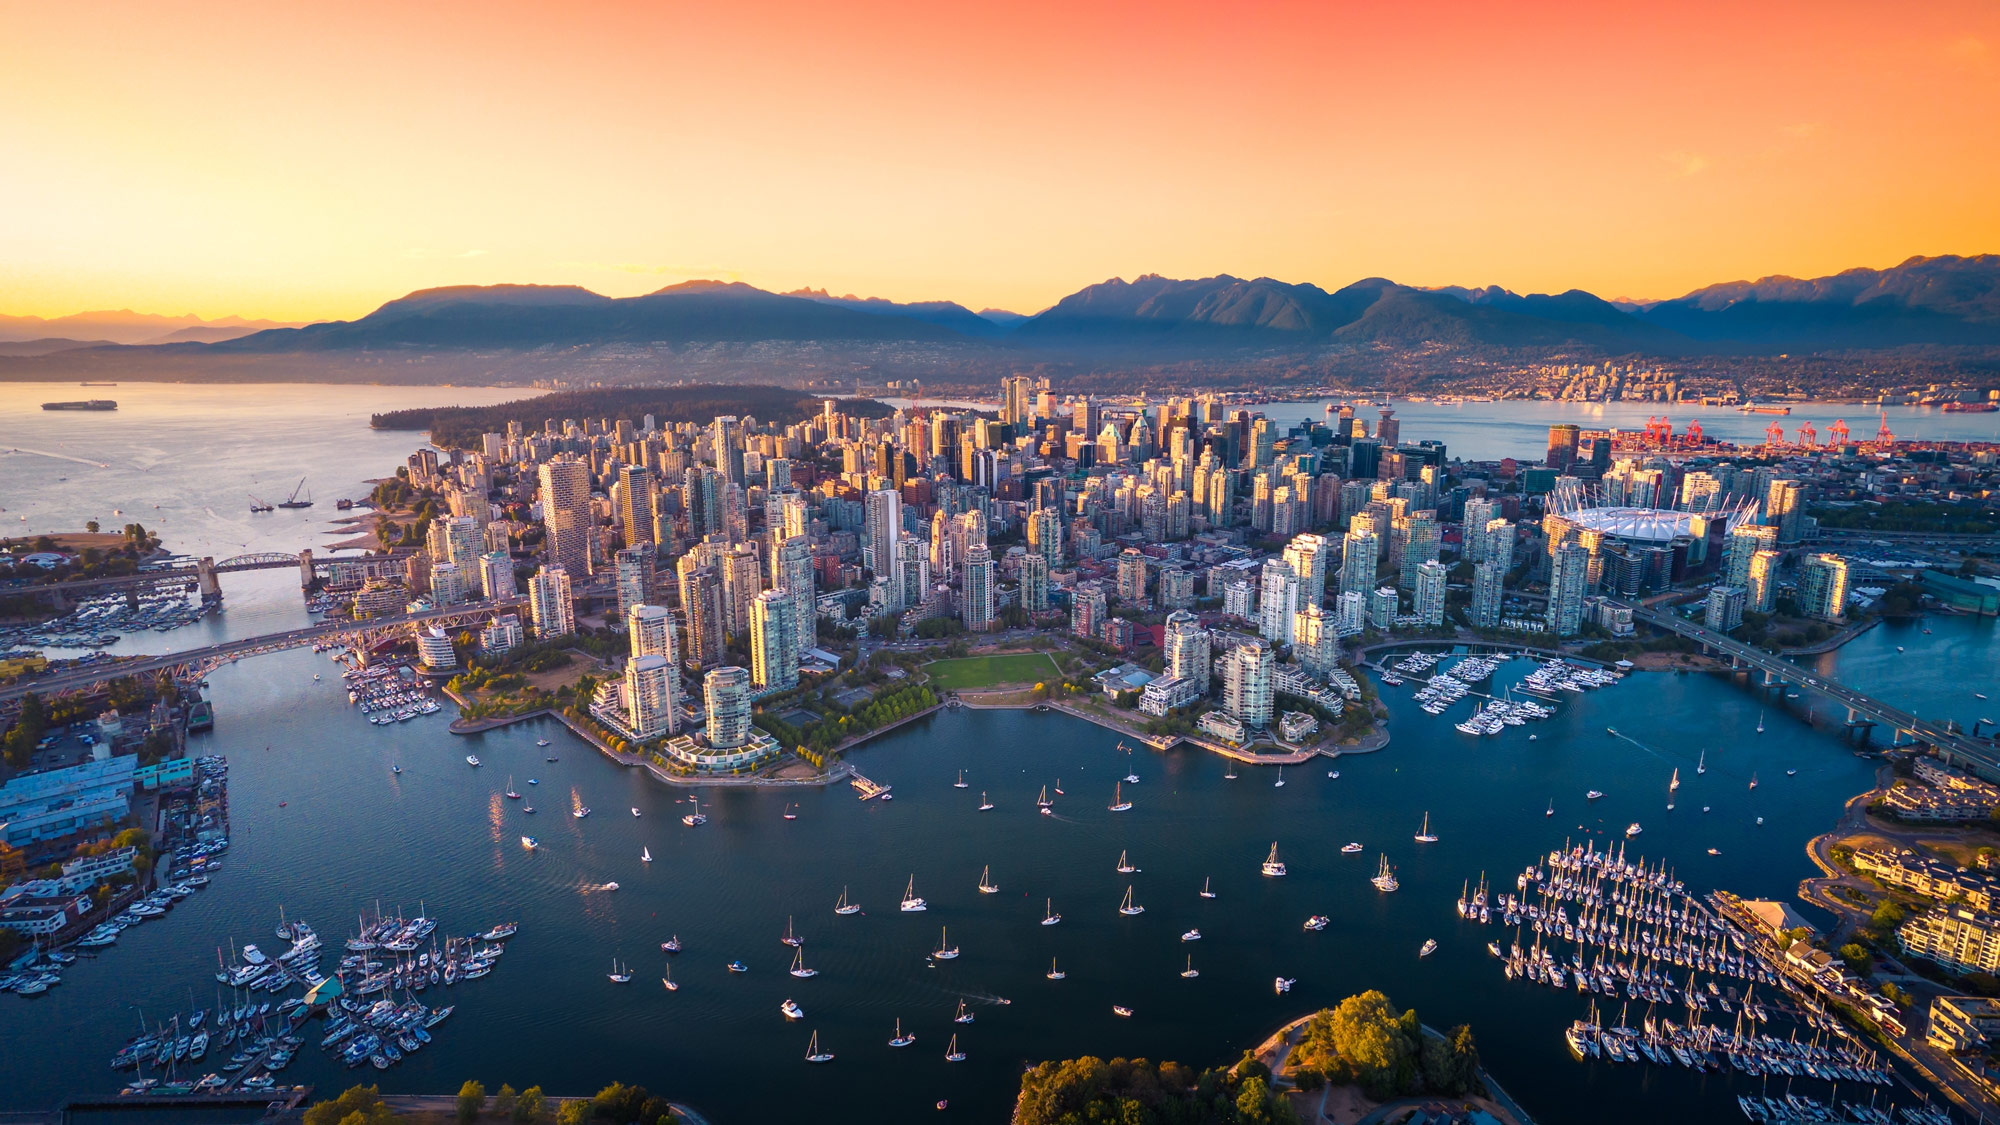 An aerial shot of downtown Vancouver, showing mountains in the background and the ocean.